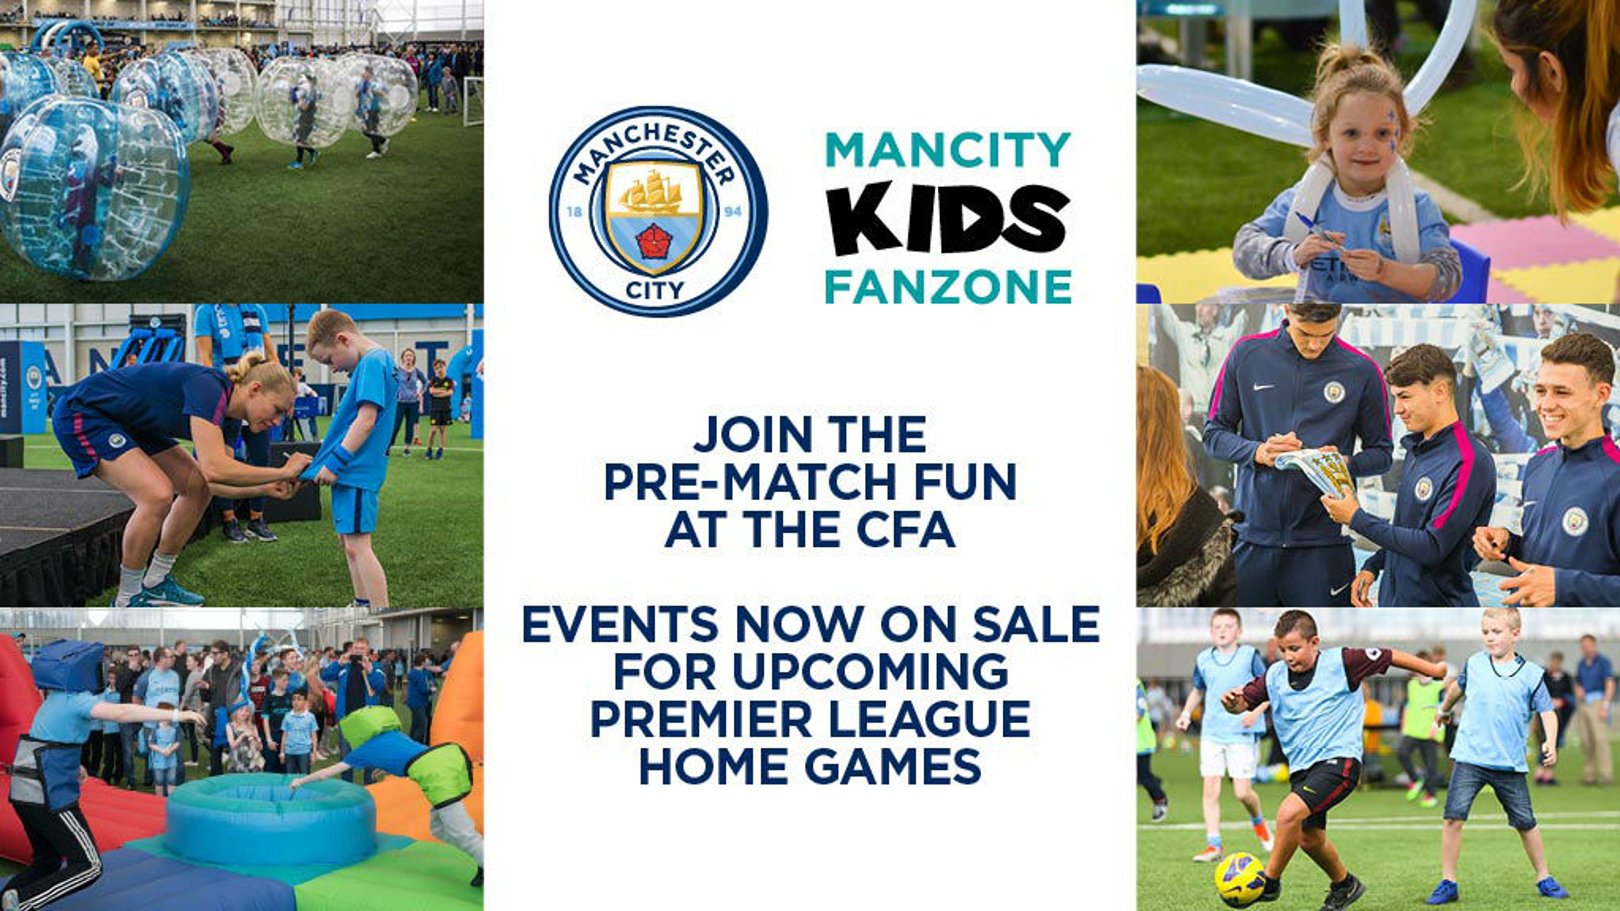 Join us at the Man City Kids Fanzone!